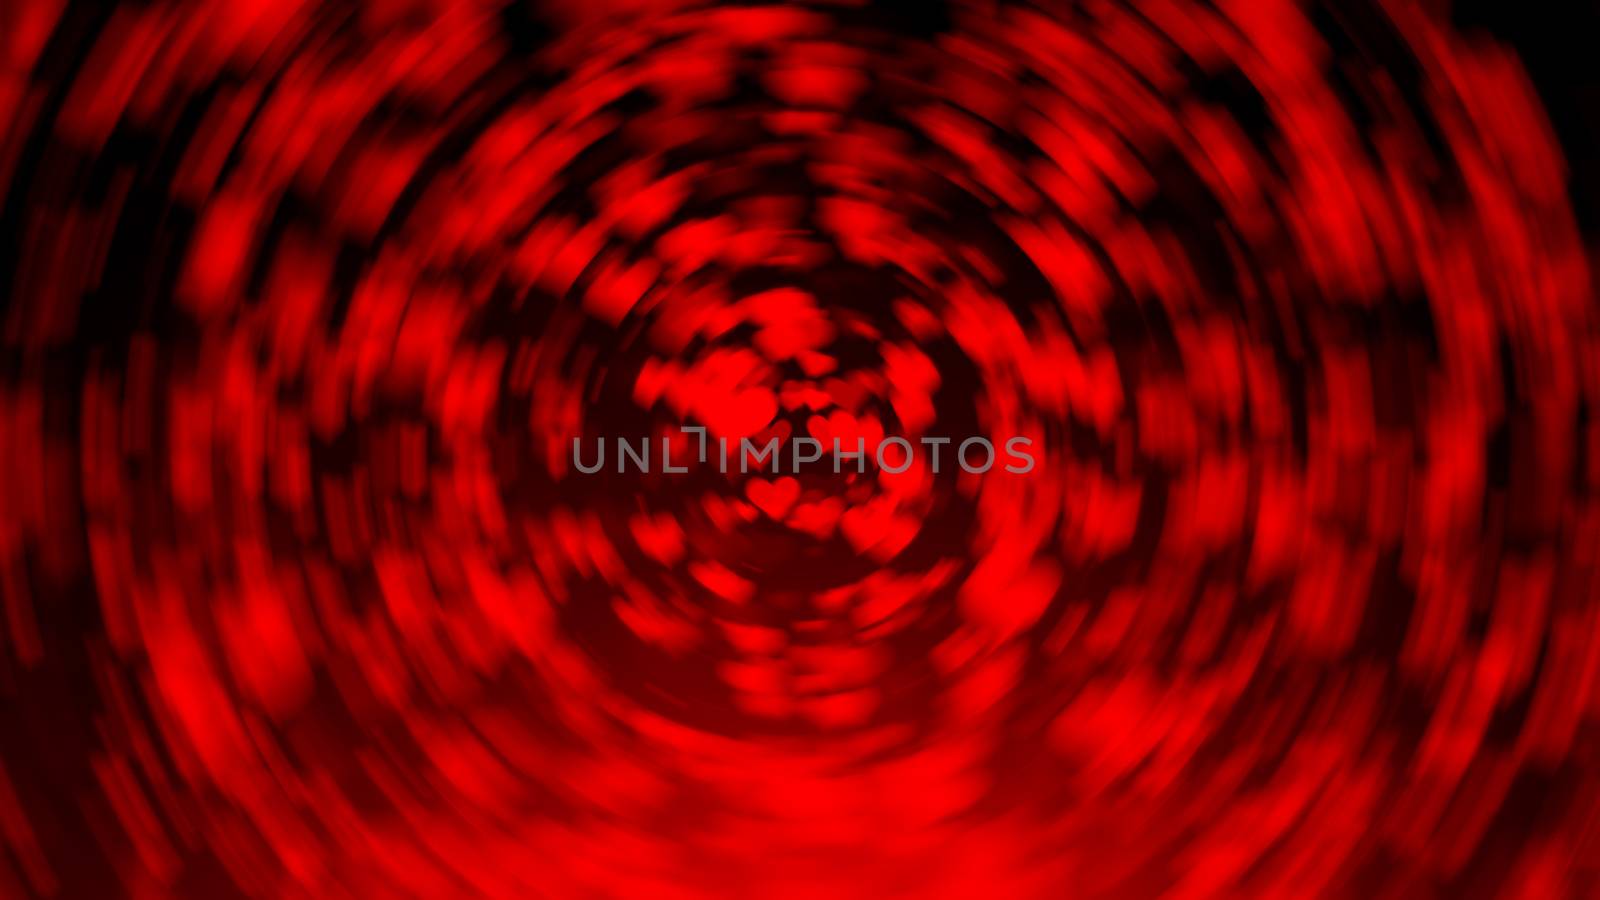 Abstract background with radial blur hearts. Digital illustration by nolimit046